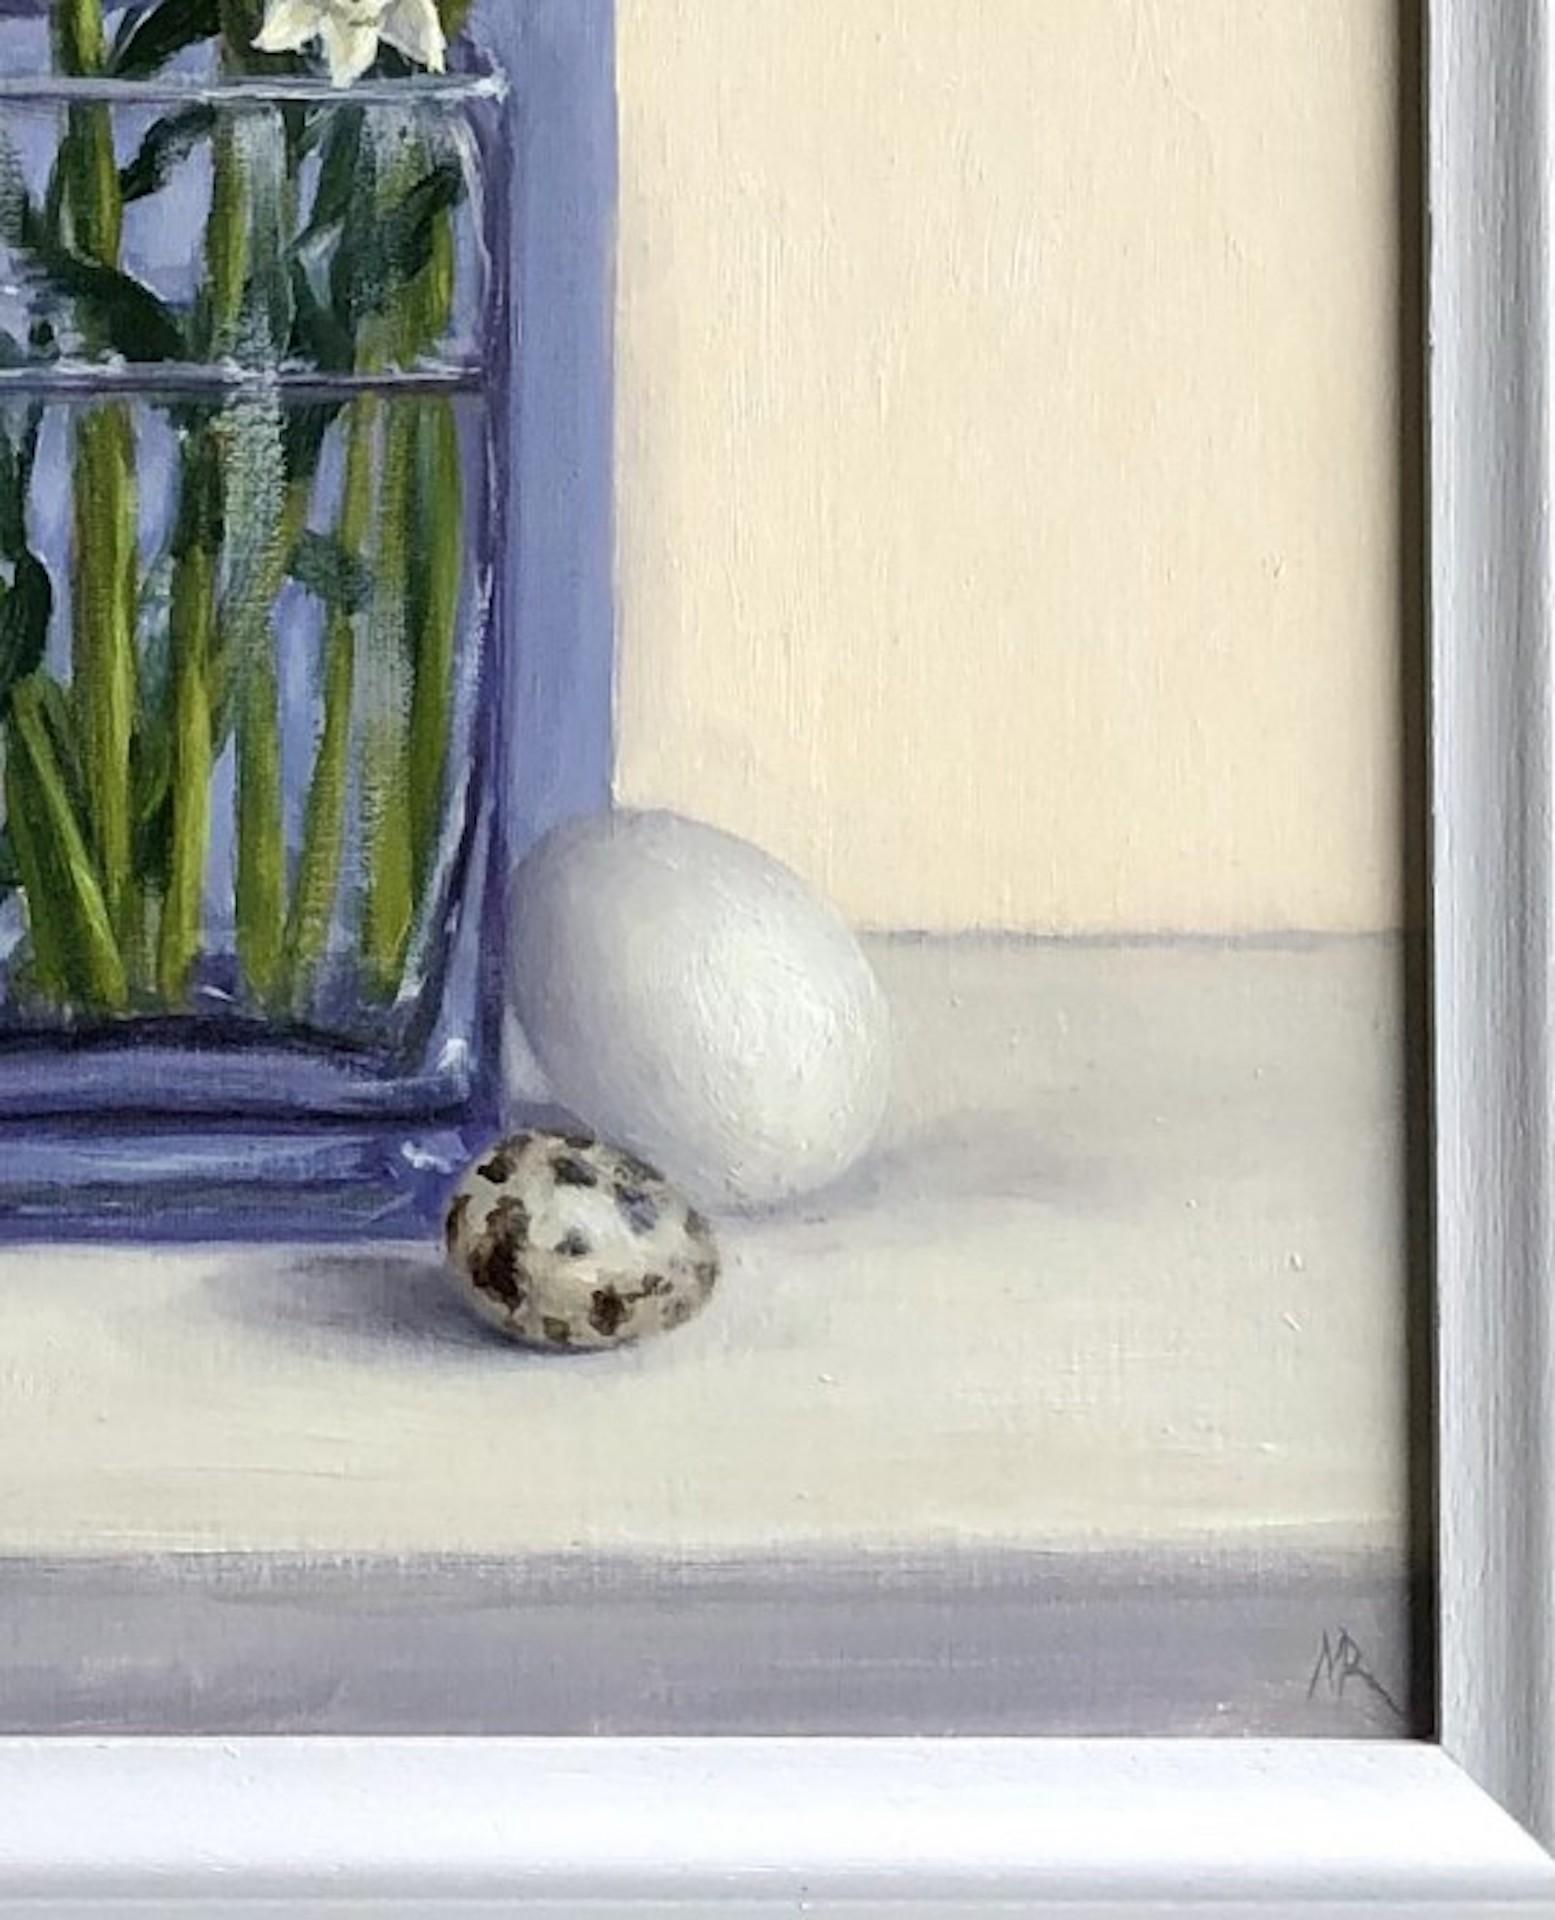 Paper Whites [2021]
Original
Still Life
Oil paint on canvas board
Image Size: H:40 cm x W:30 cm x D:0.5cm
Framed Size: H:53.5 cm x W:43.5 cm x D:3.5cm
Sold Framed
Please note that insitu images are purely an indication of how a piece may look

Marie